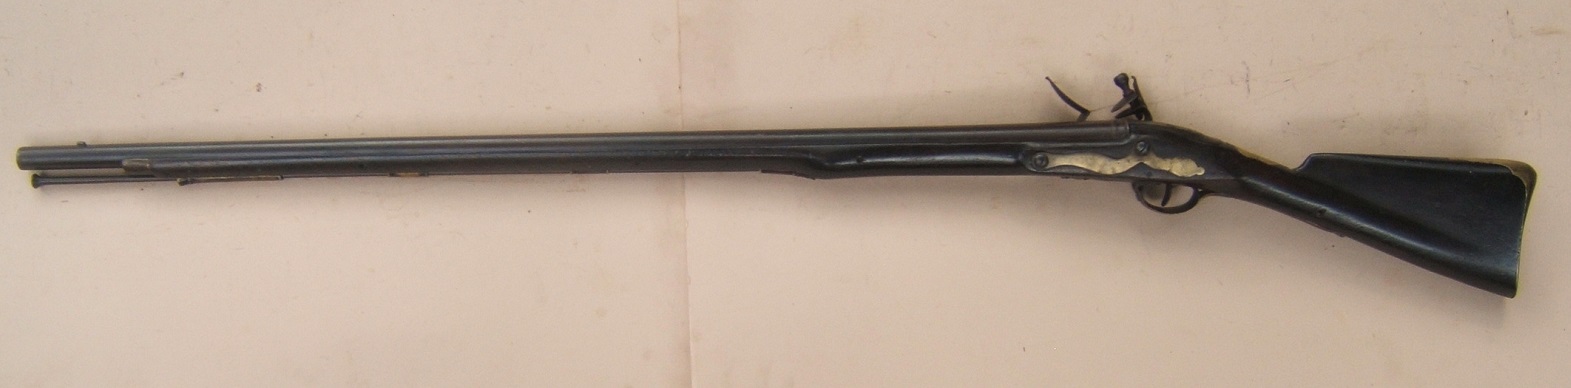 A FINE & SCARCE EARLY AMERICAN REVOLUTIONARY PATTERN 1768 SECOND MODEL/SHORTLAND BROWN BESS MUSKET, ca. 1769 view 2